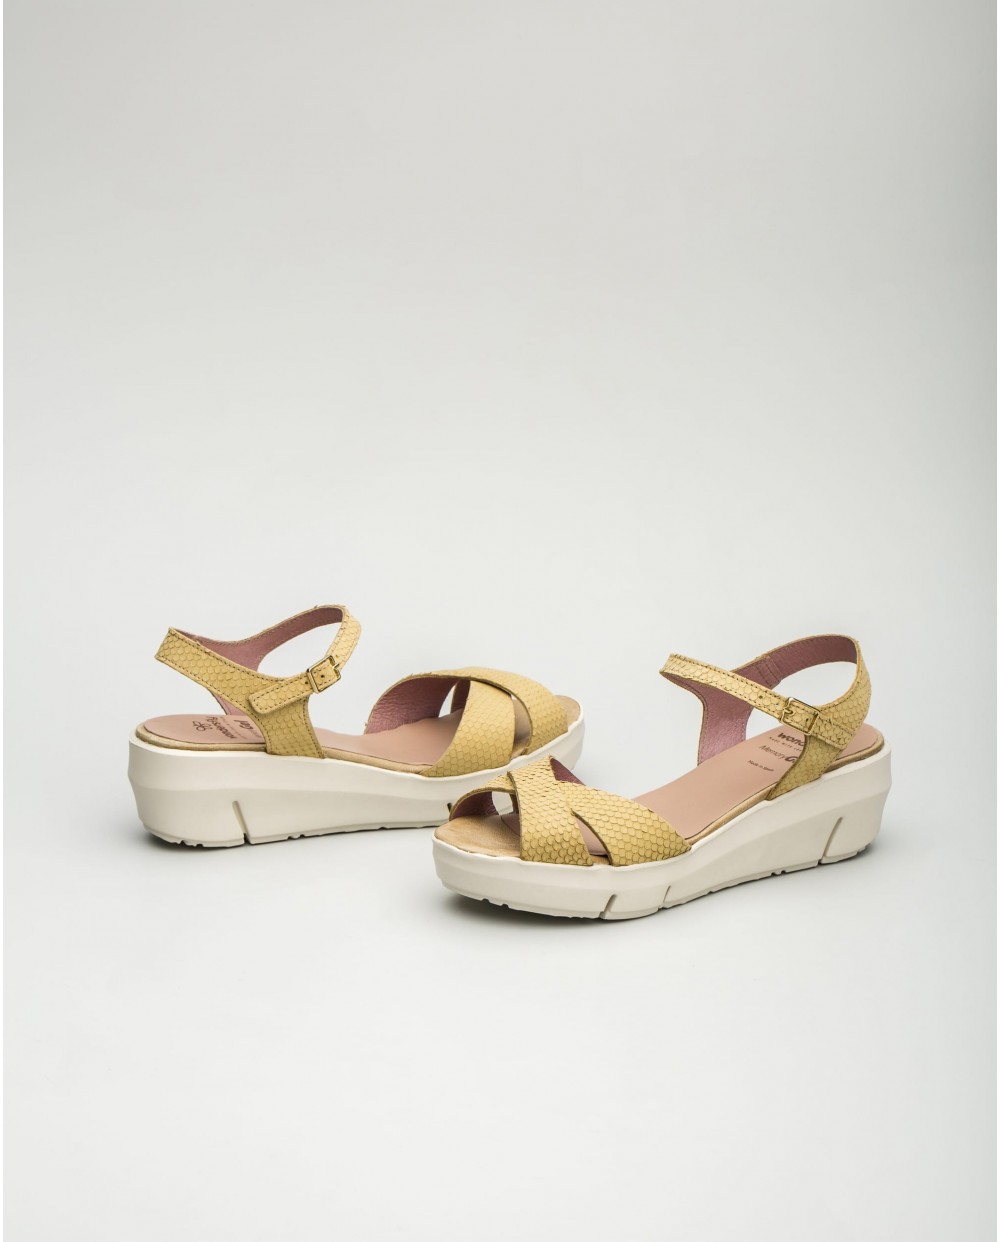 Wonders-Outlet-wedge sandal with criss cross straps